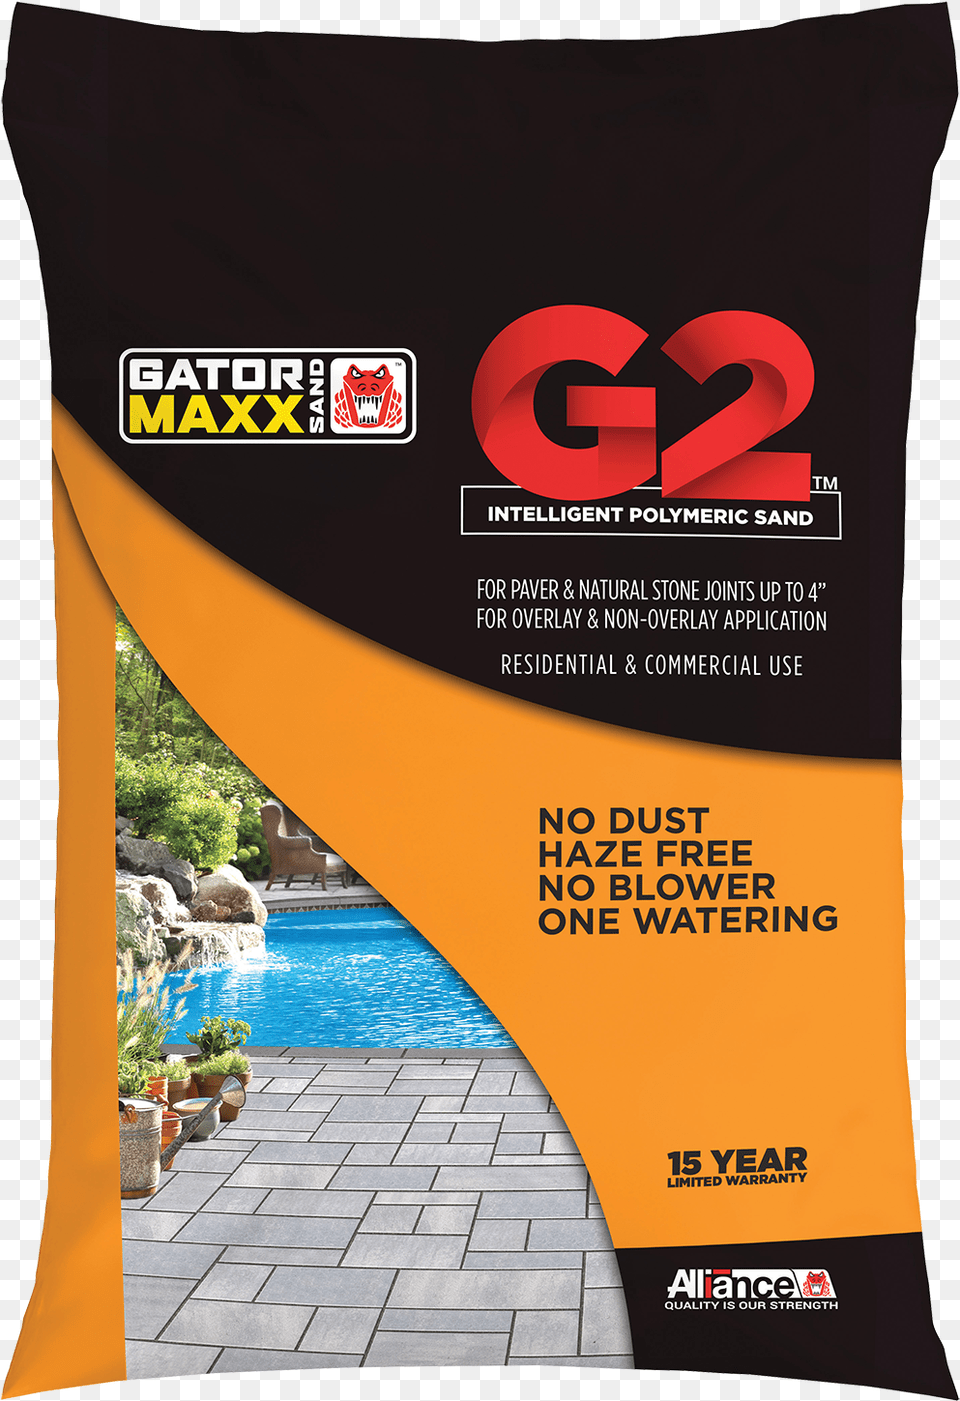 Maxx Polymeric Sand, Advertisement, Poster, Pool, Swimming Pool Png Image